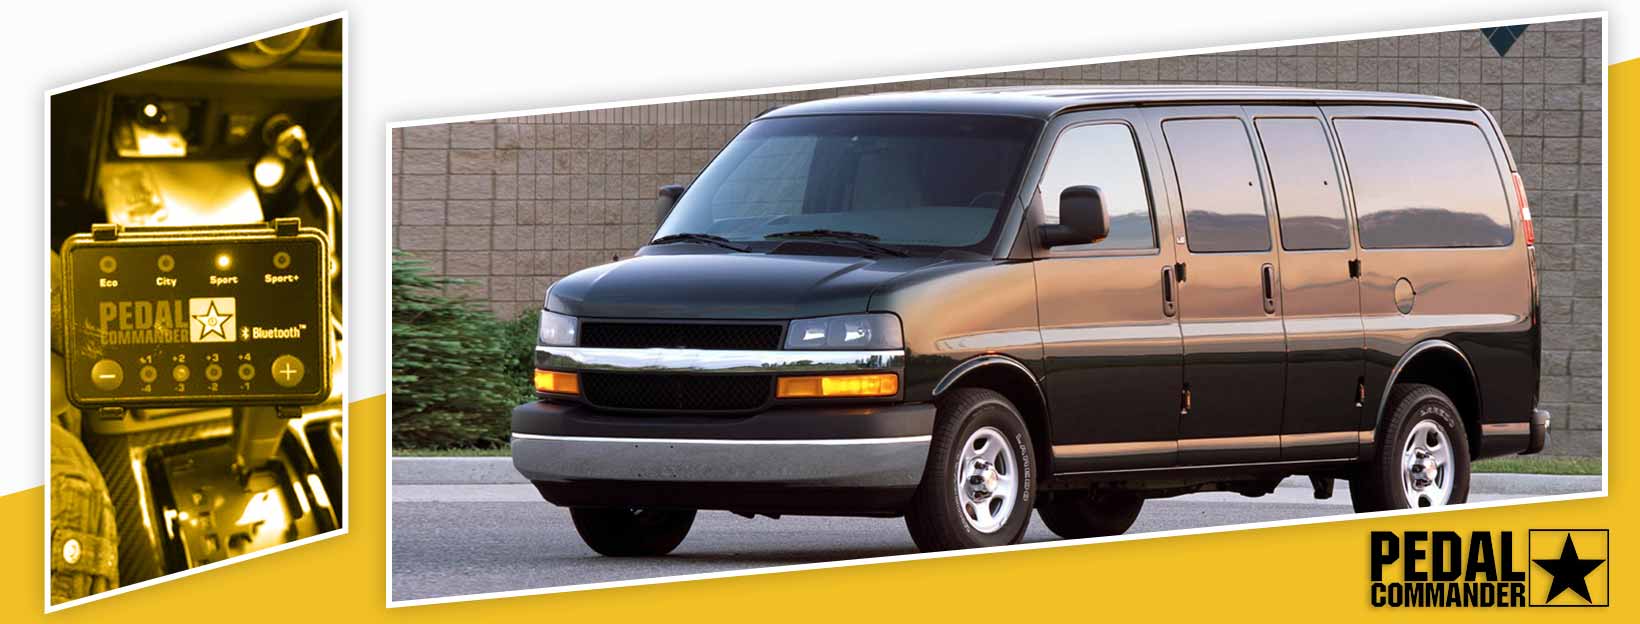 Pedal Commander for Chevrolet Express - front